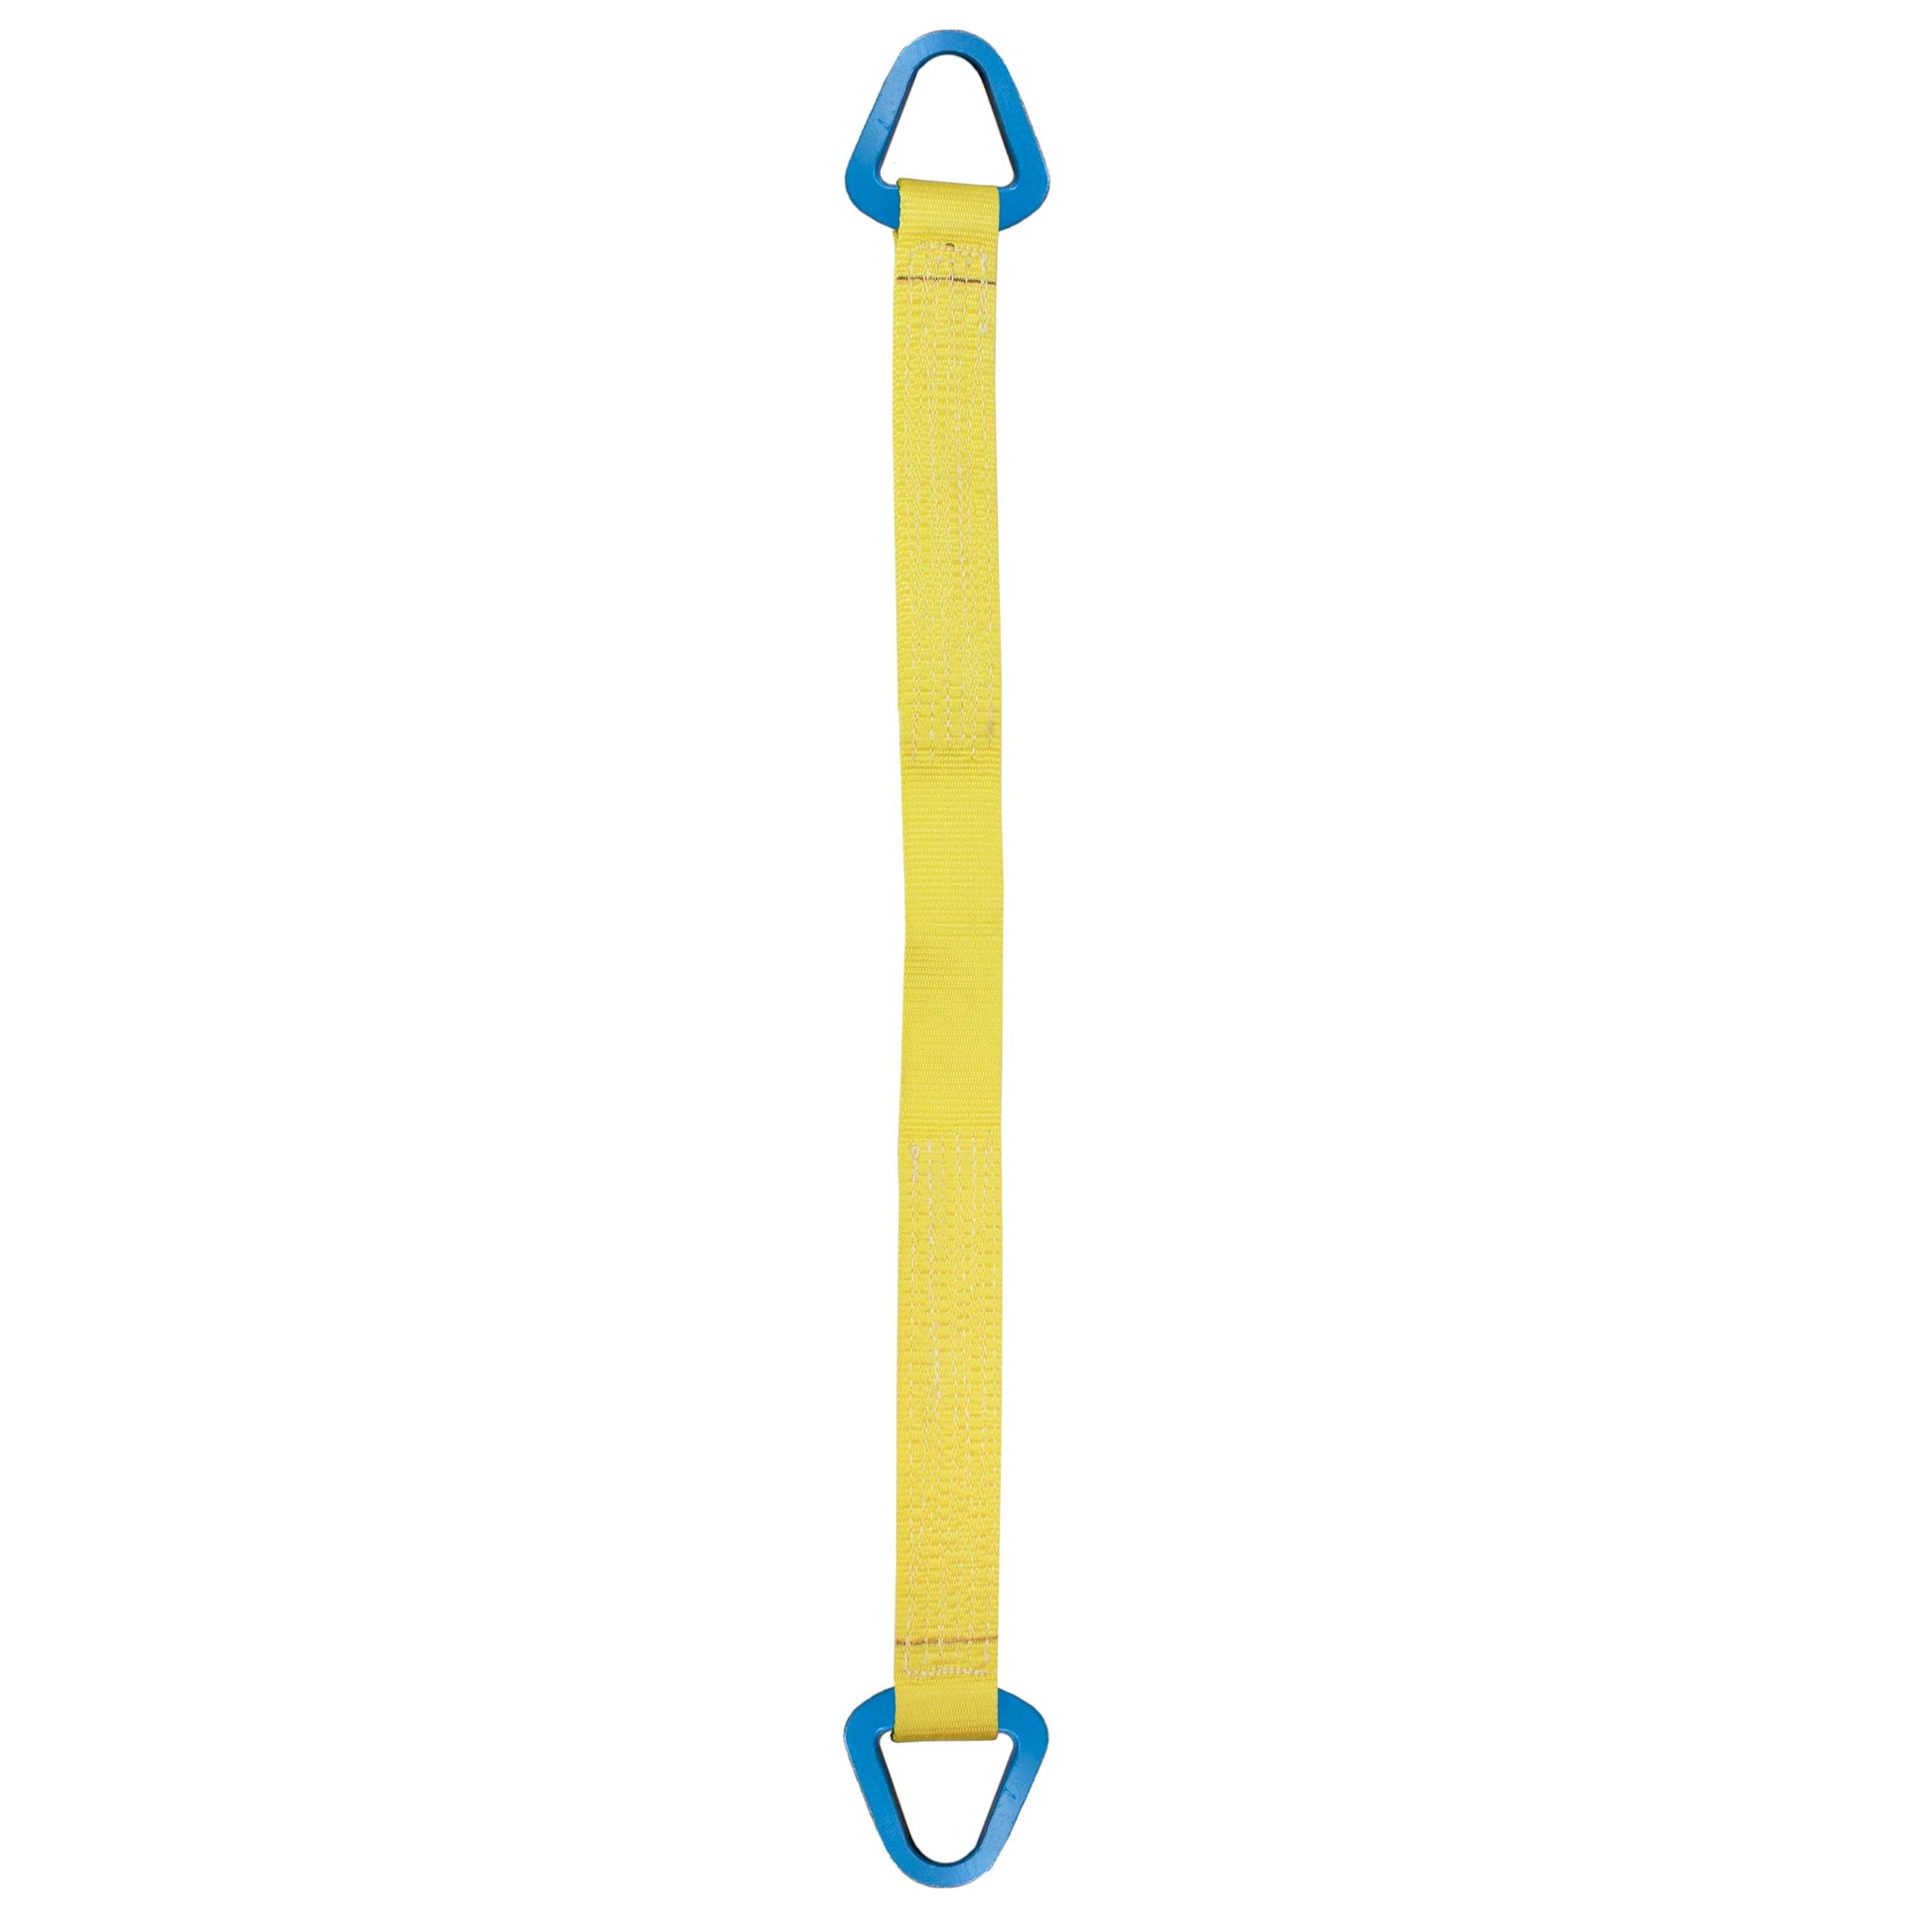 Nylon Lifting Sling Triangle 10 inch x 6 foot 1ply image 1 of 2